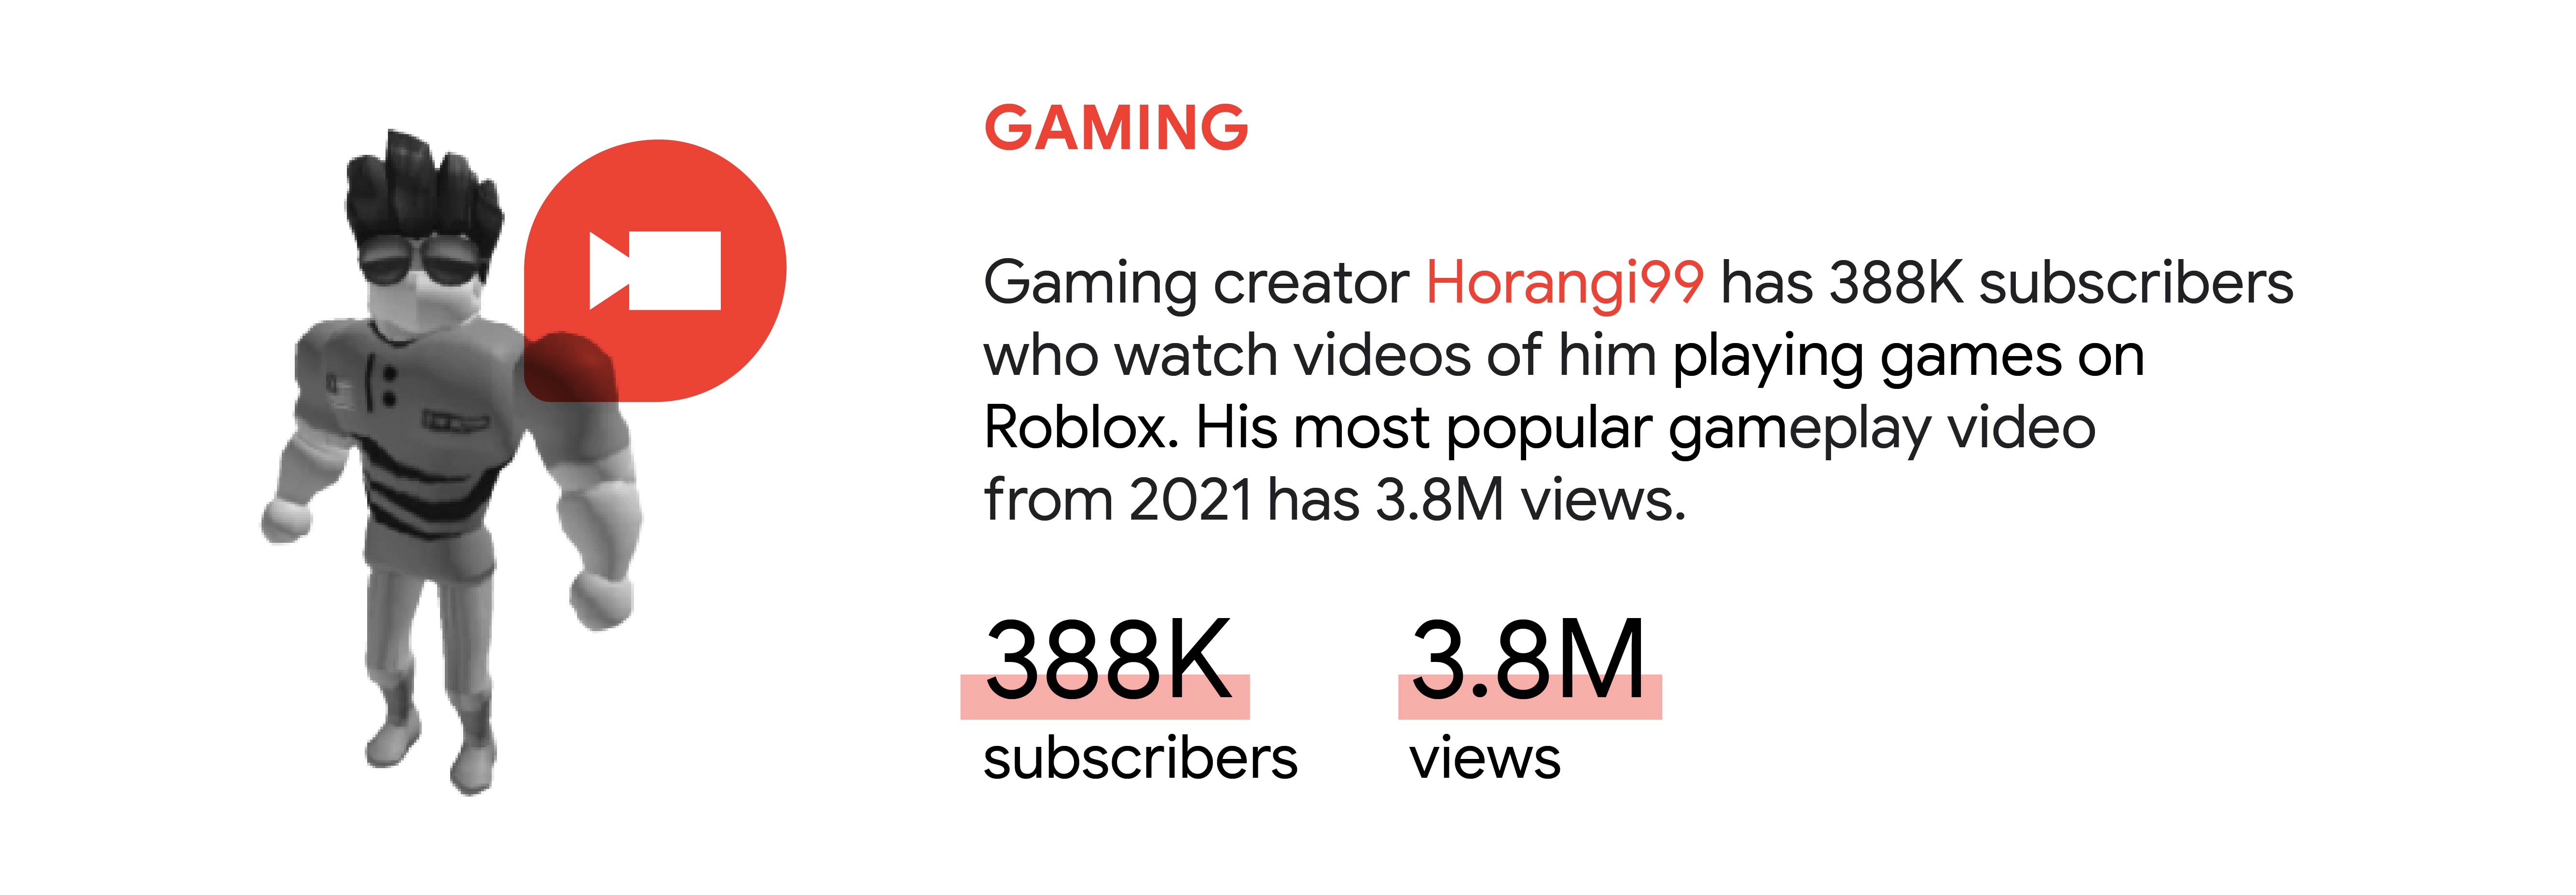 YouTube trend 3: Gaming. In Malaysia, gaming creator Horangi99 has 388K subscribers who watch videos of him playing games on Roblox. His most popular gameplay video from 2021 has 3.8M views.